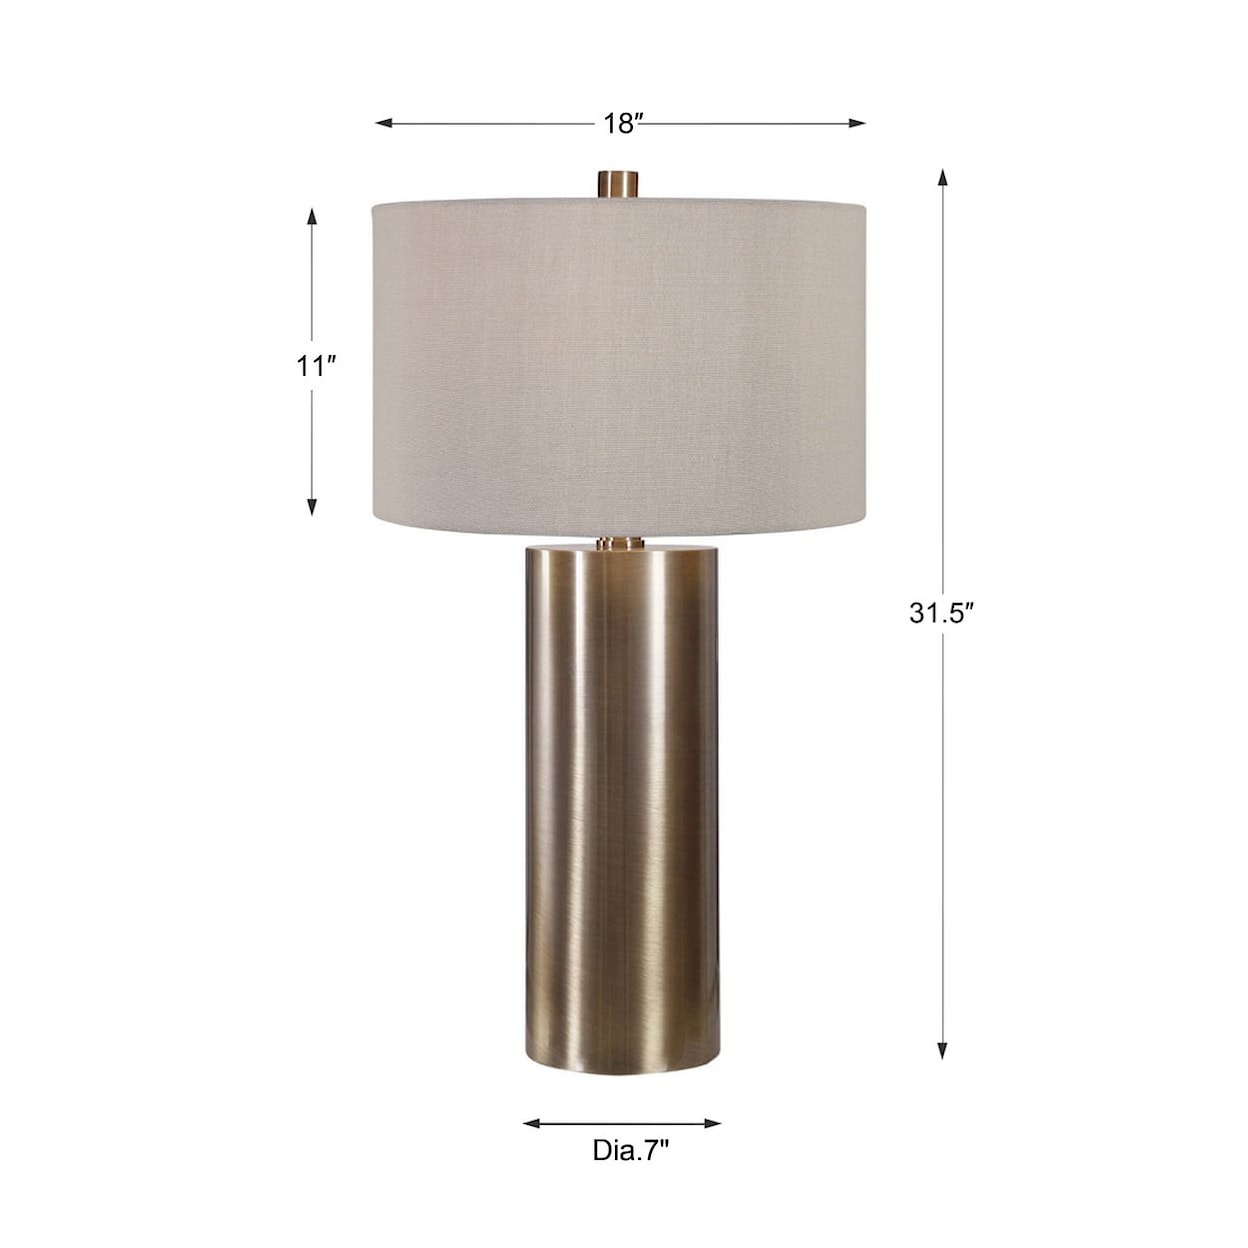 Uttermost Table Lamps Taria Brushed Brass Table Lamp